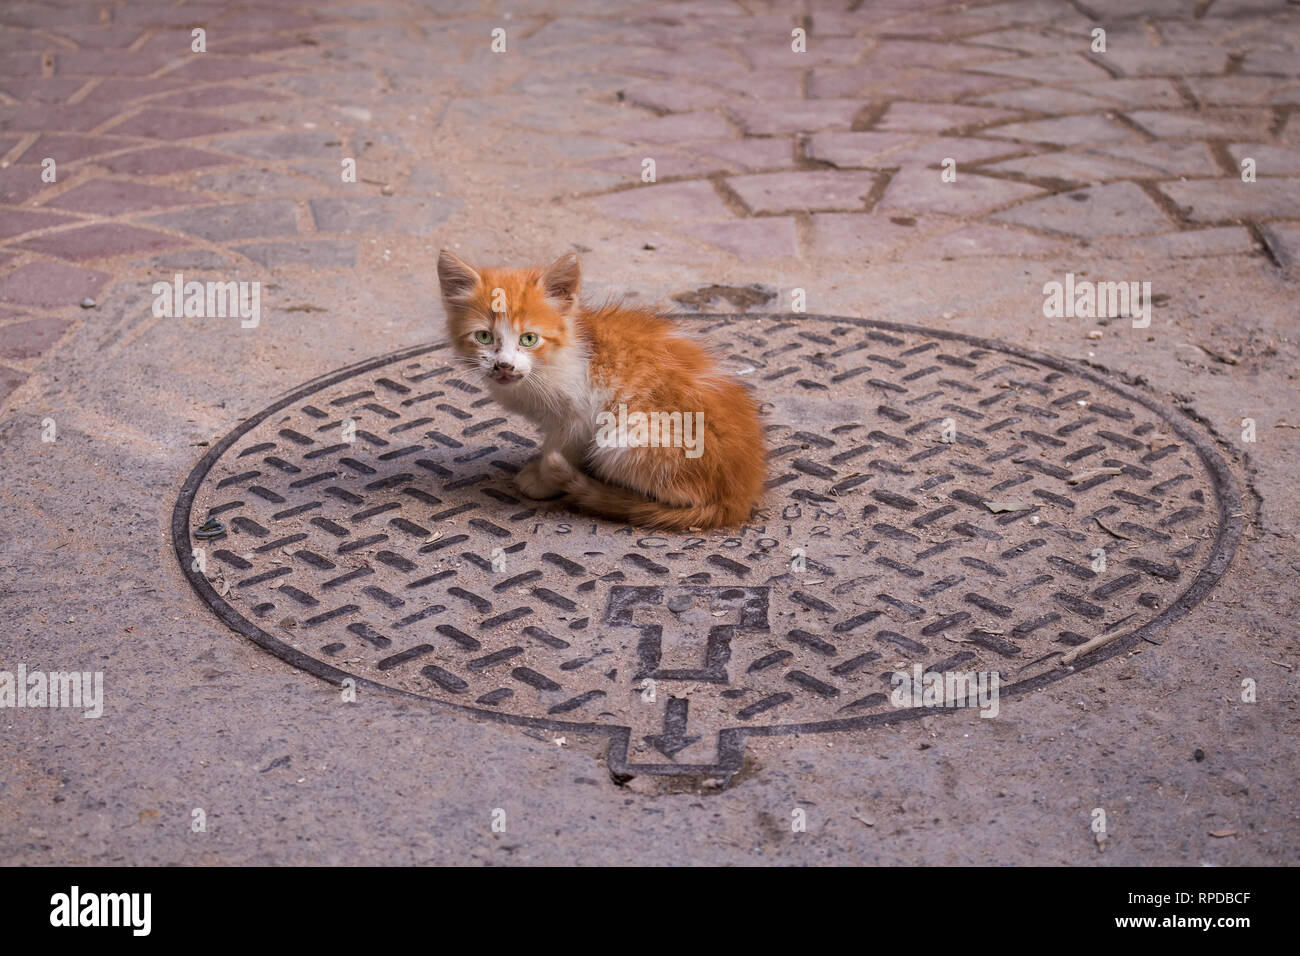 Little red long fur cat with bright green eyes, sitting on a channel of a street with paving. Safi, Morocco. Stock Photo